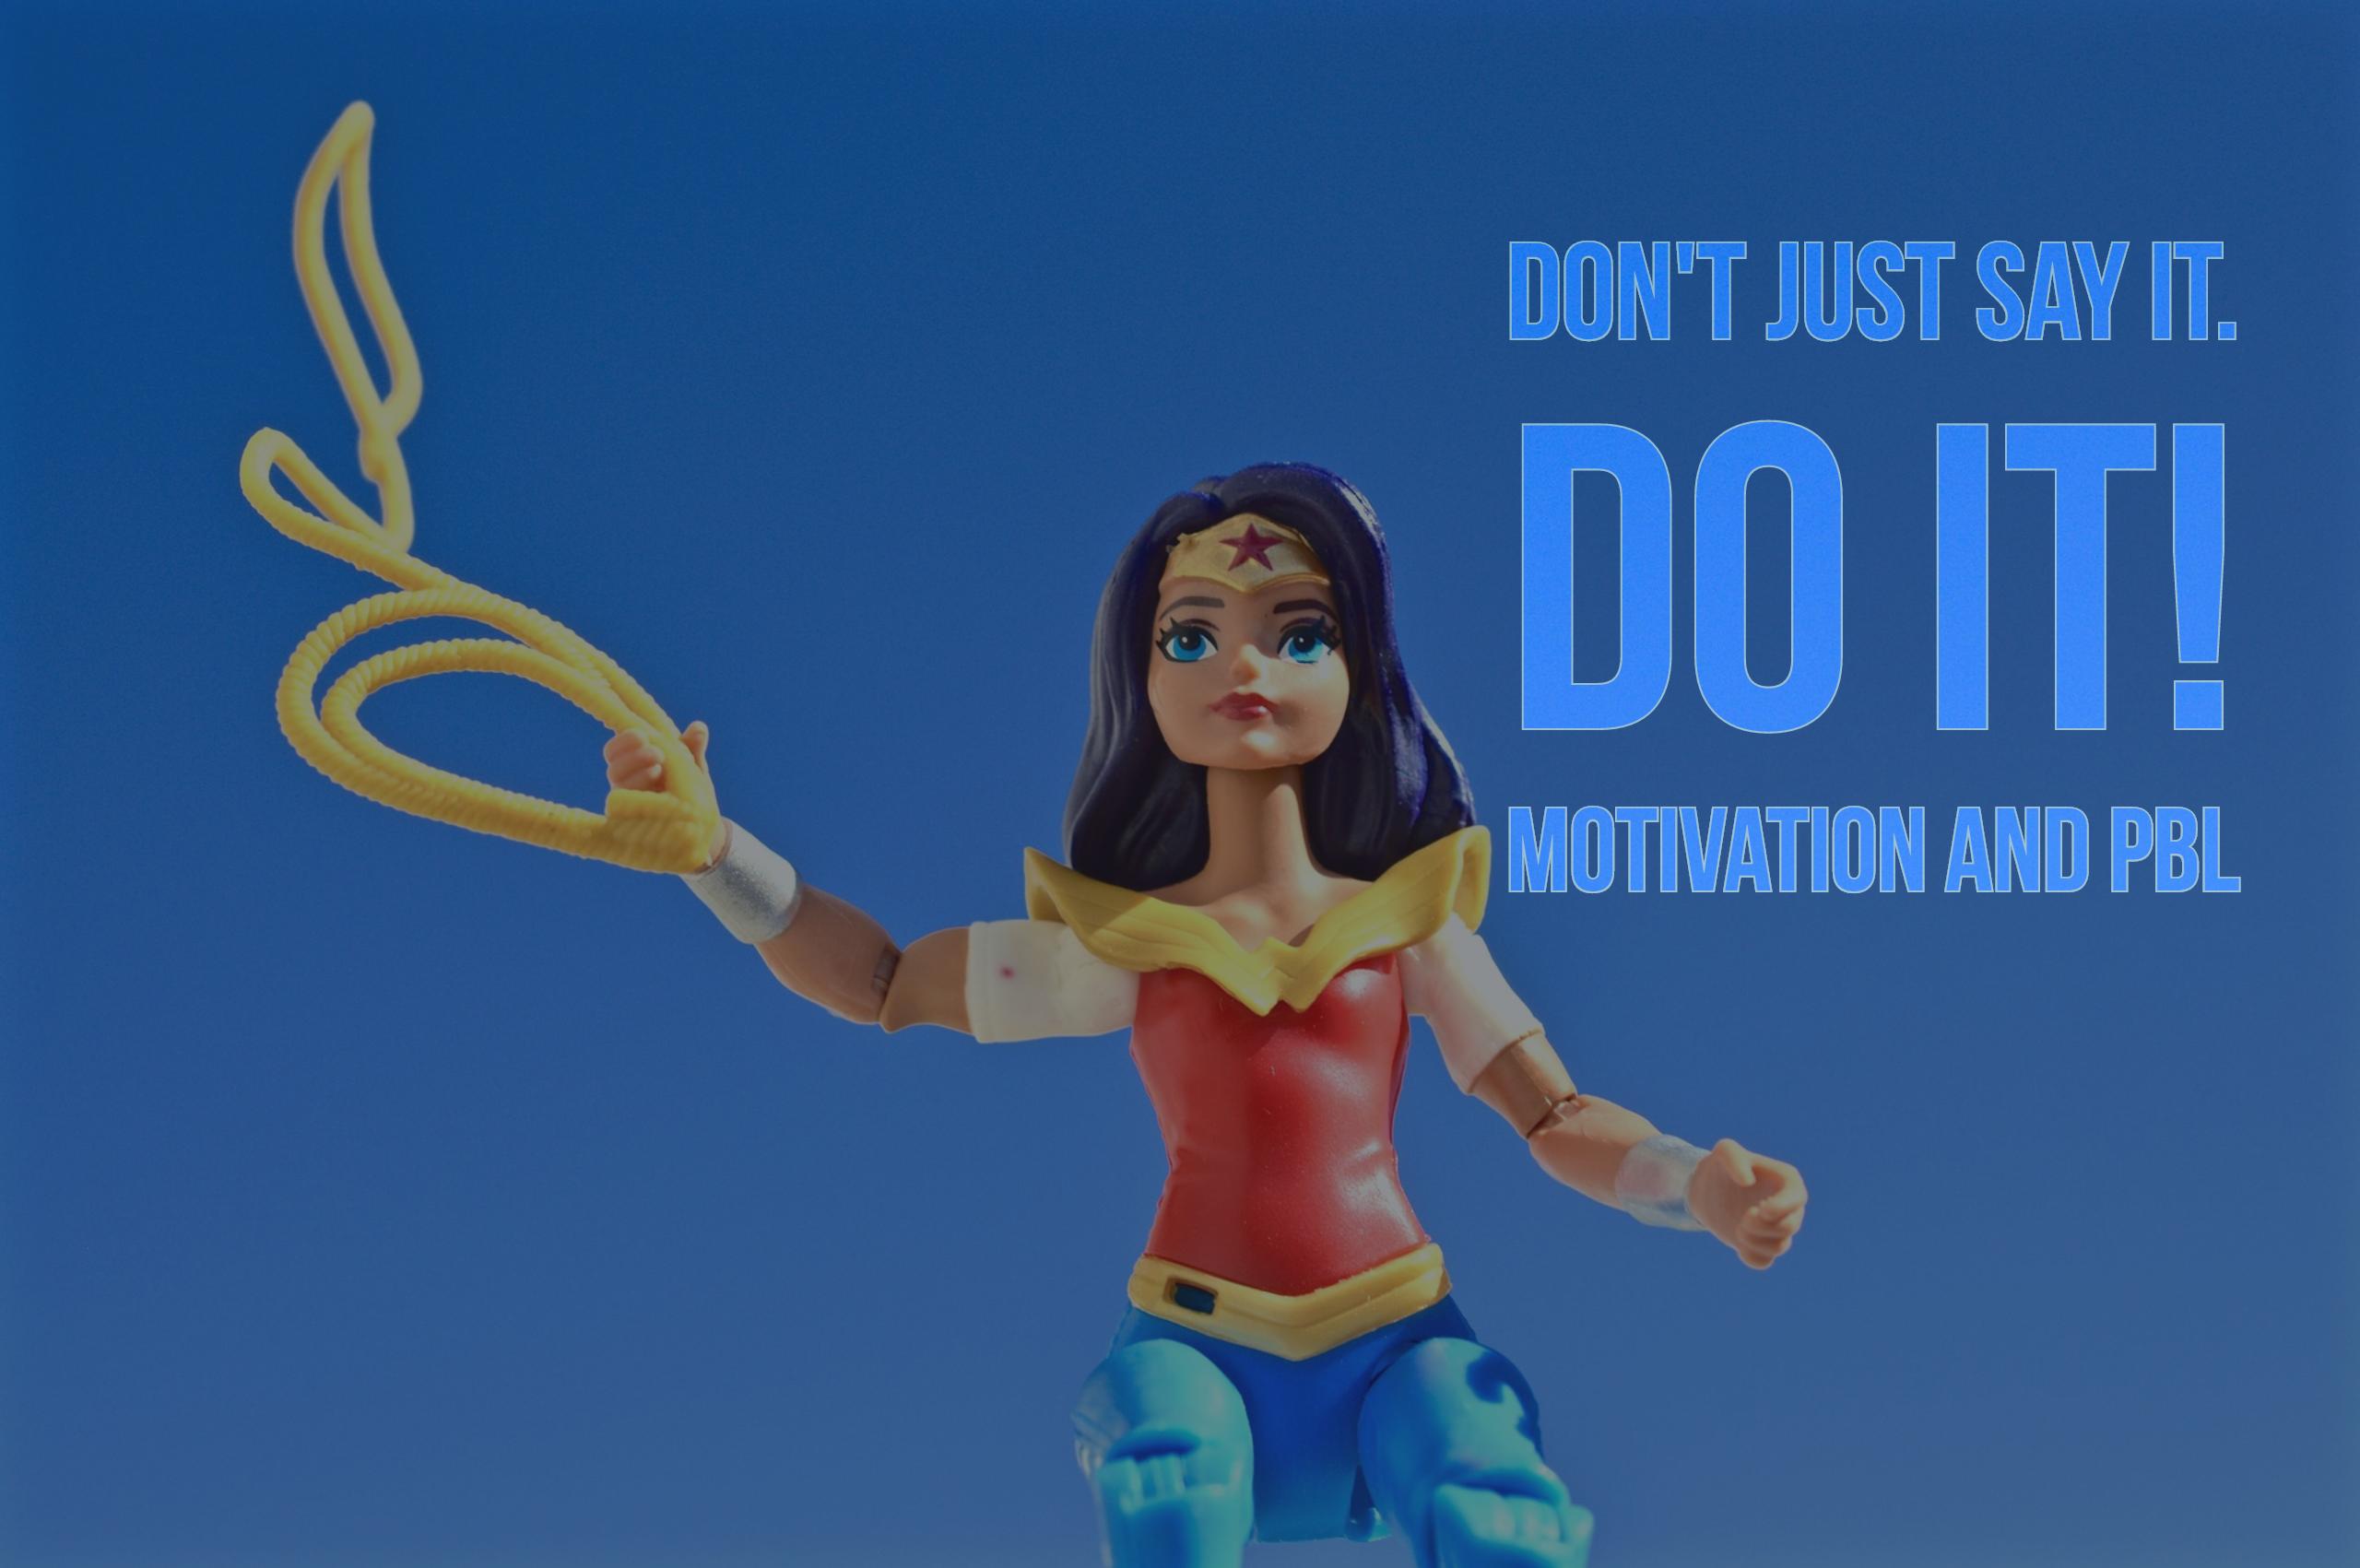 Don’t just say it. Do it! Motivation and PBL